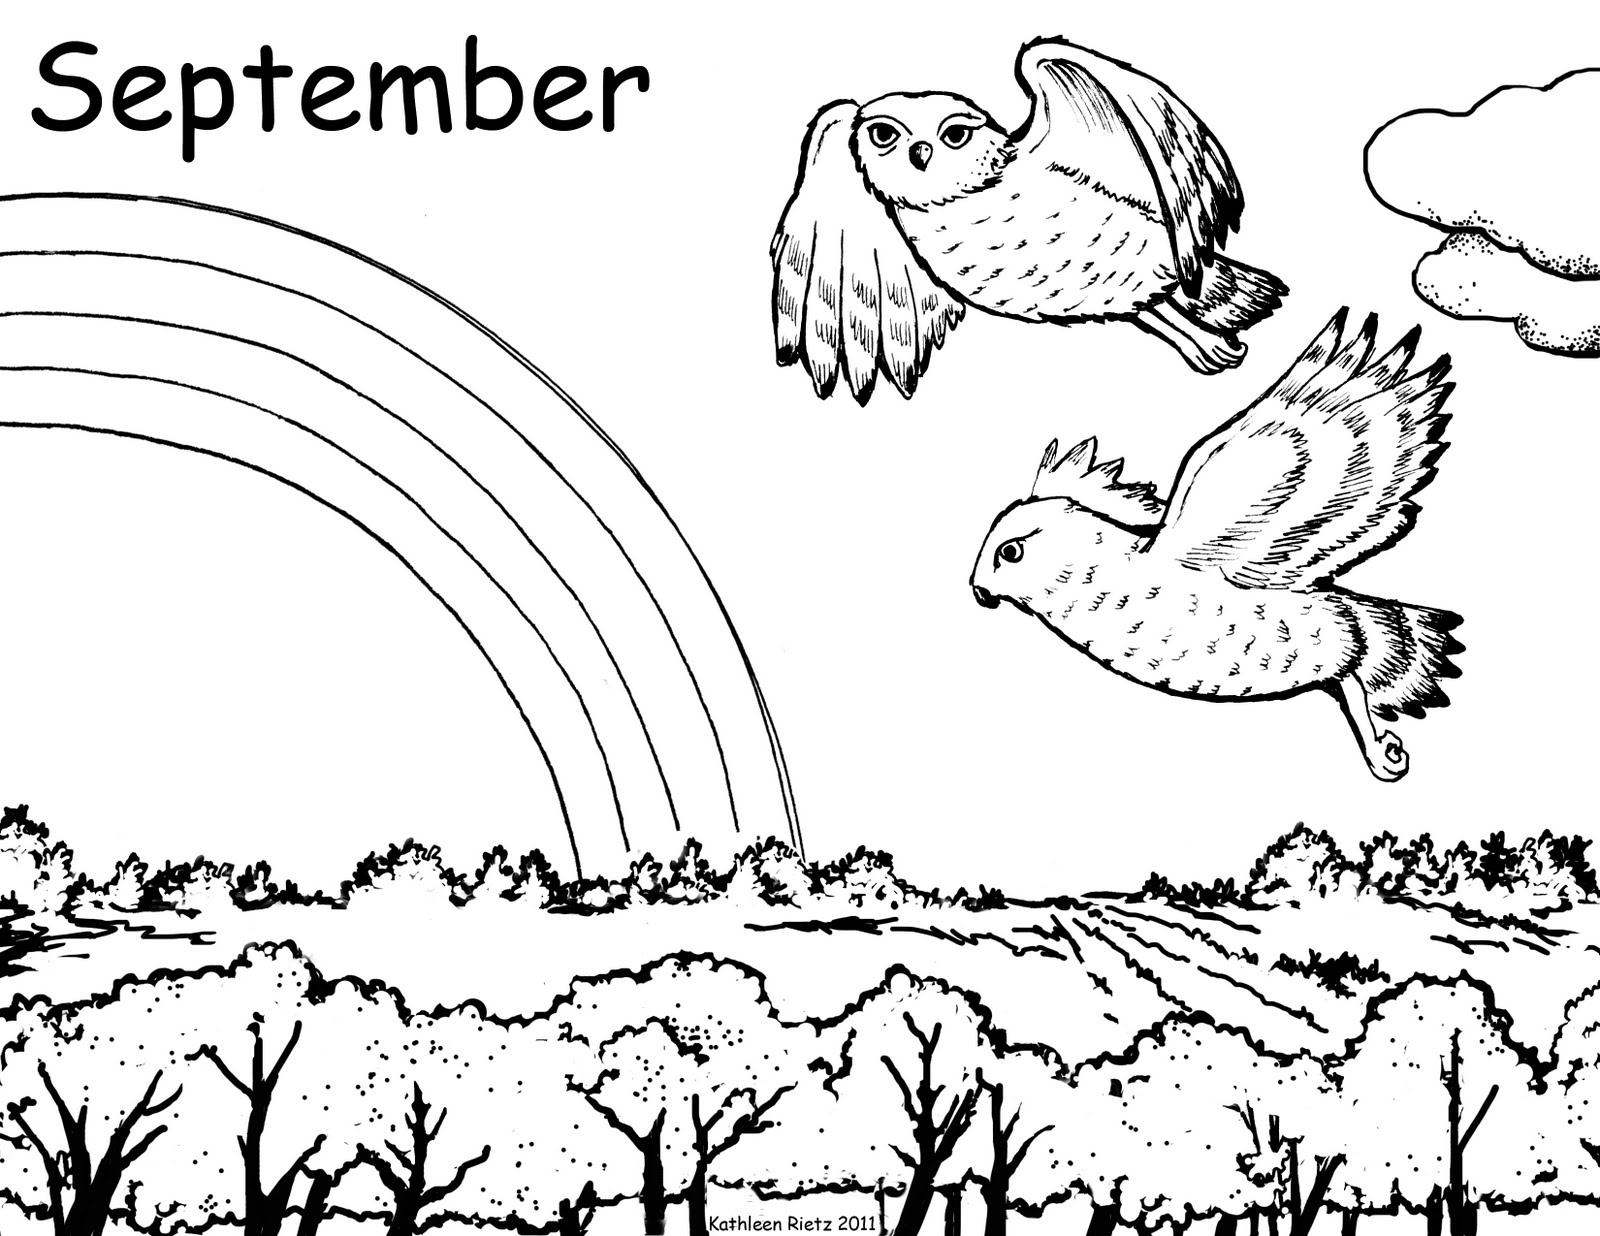 Coloring Pages For September Kathleen Rietz Illustration And Design Prairie Storms New Book